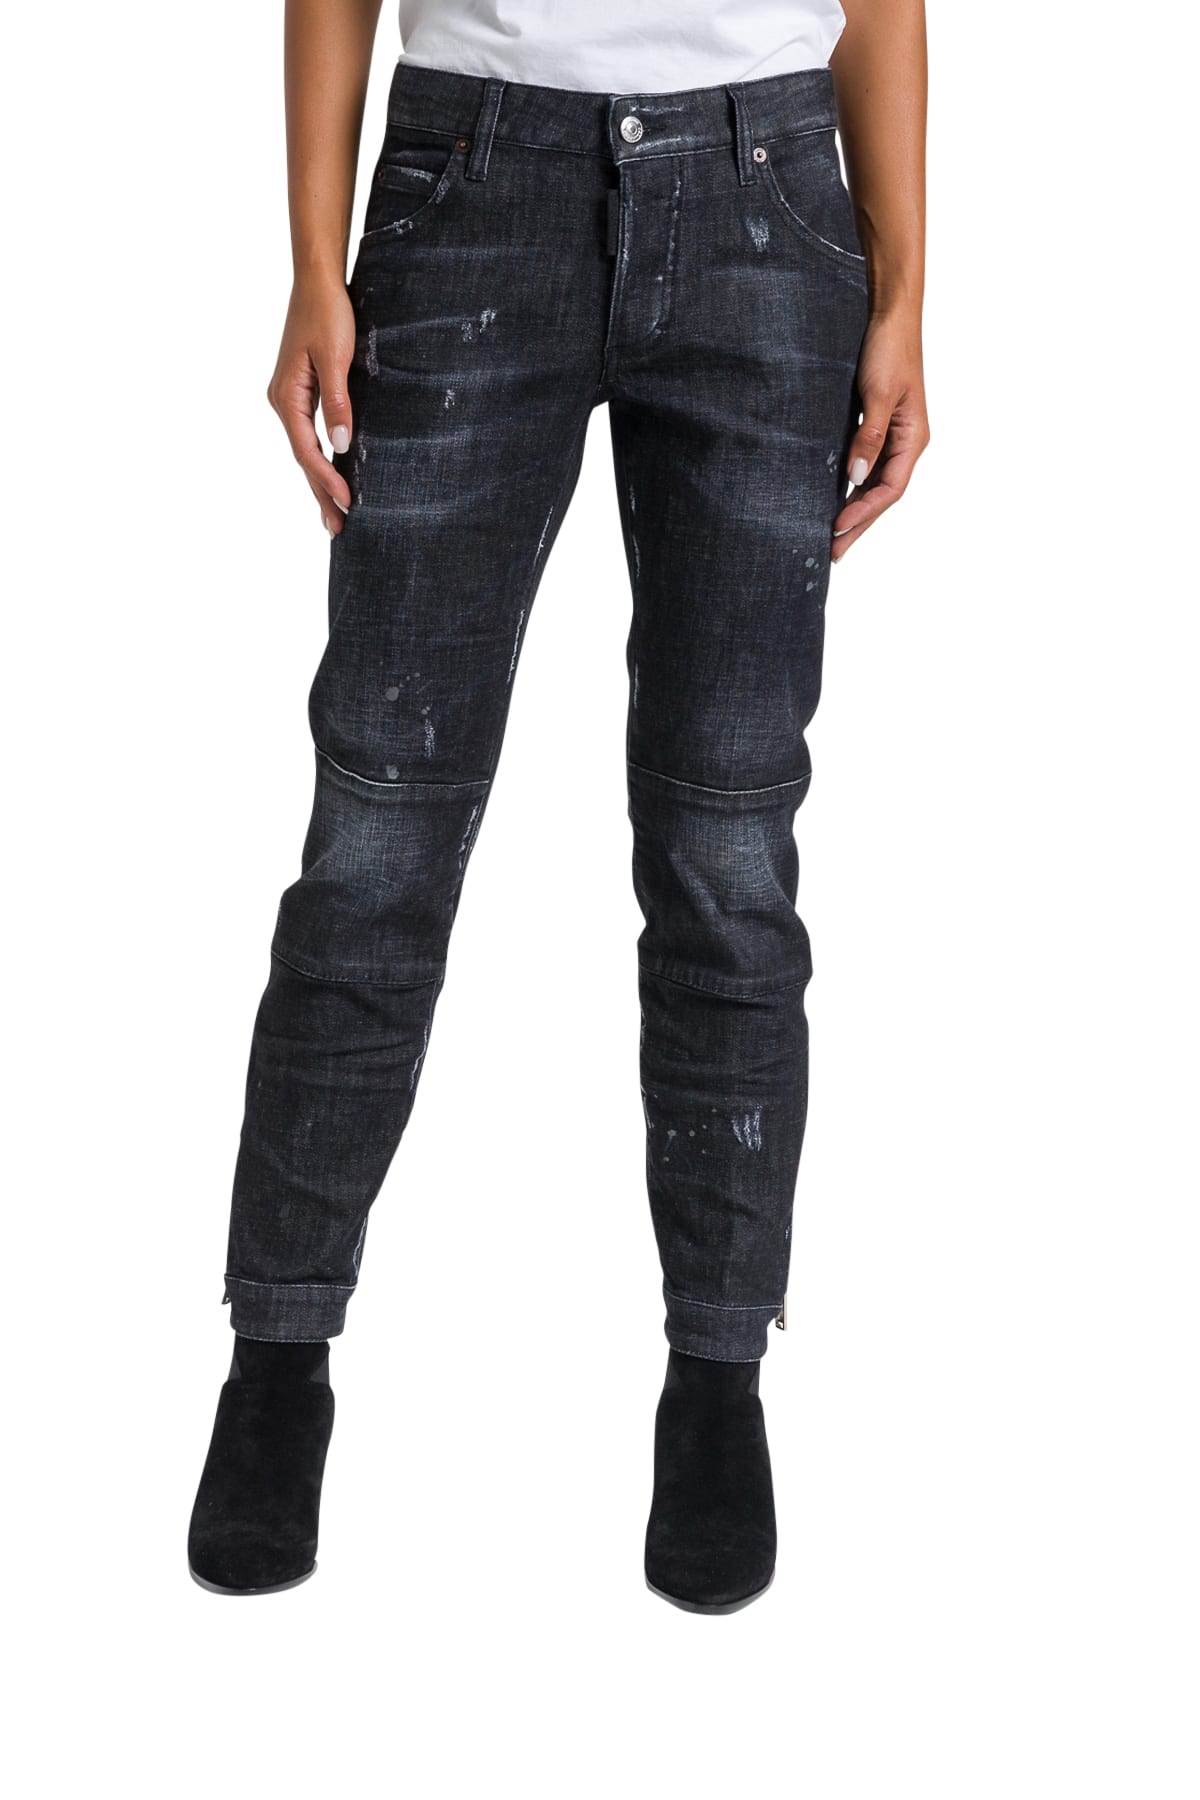 dsquared jeans with zipper